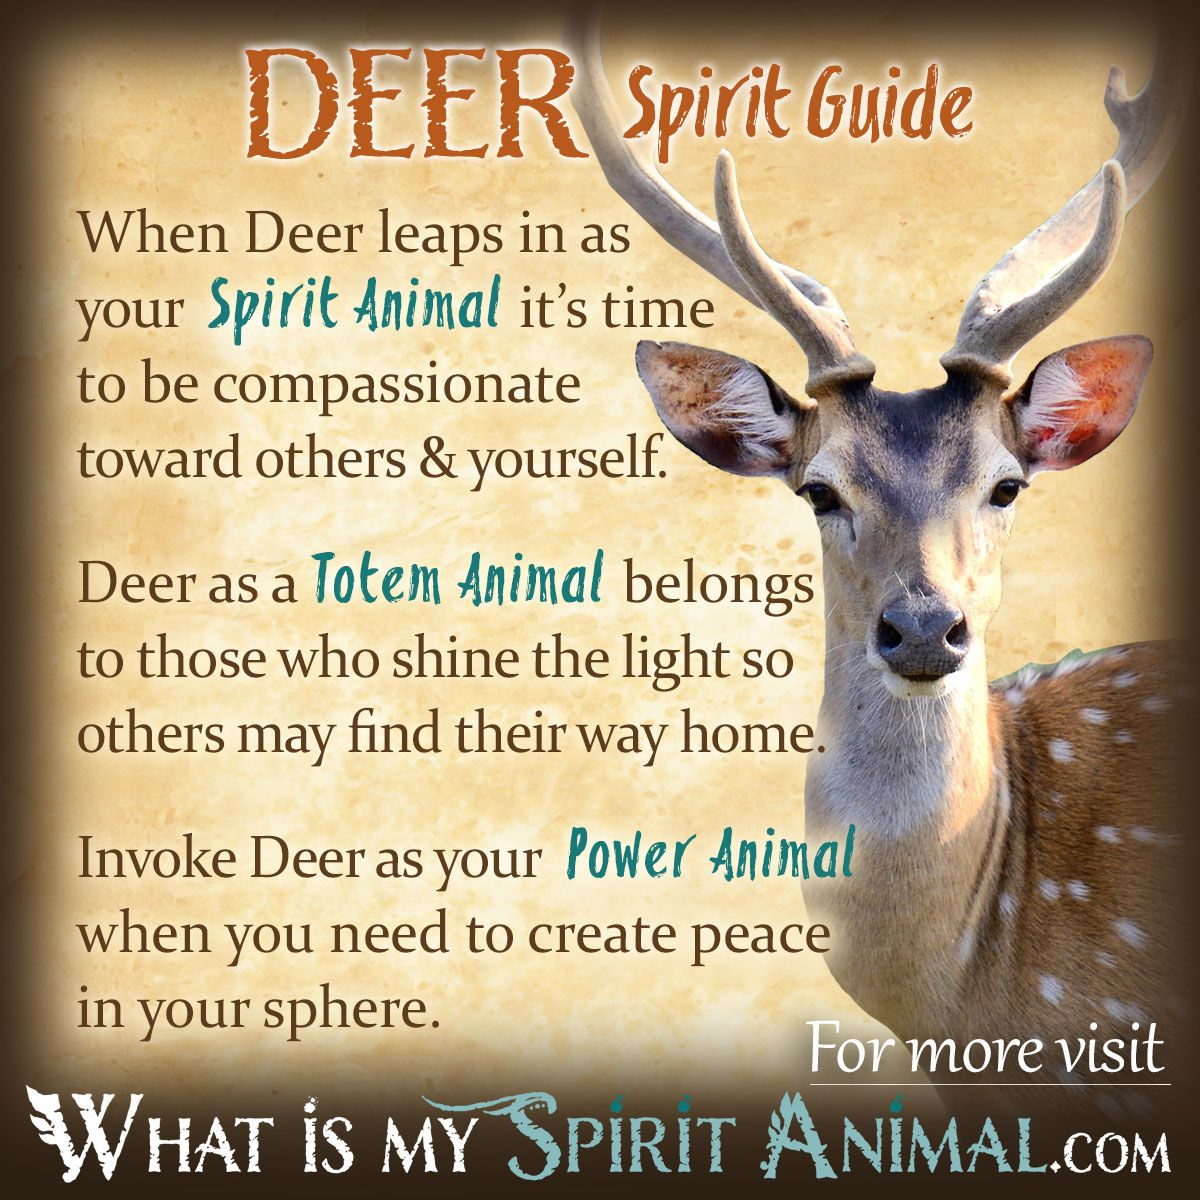 What does it mean if the deer is your spirit animal?